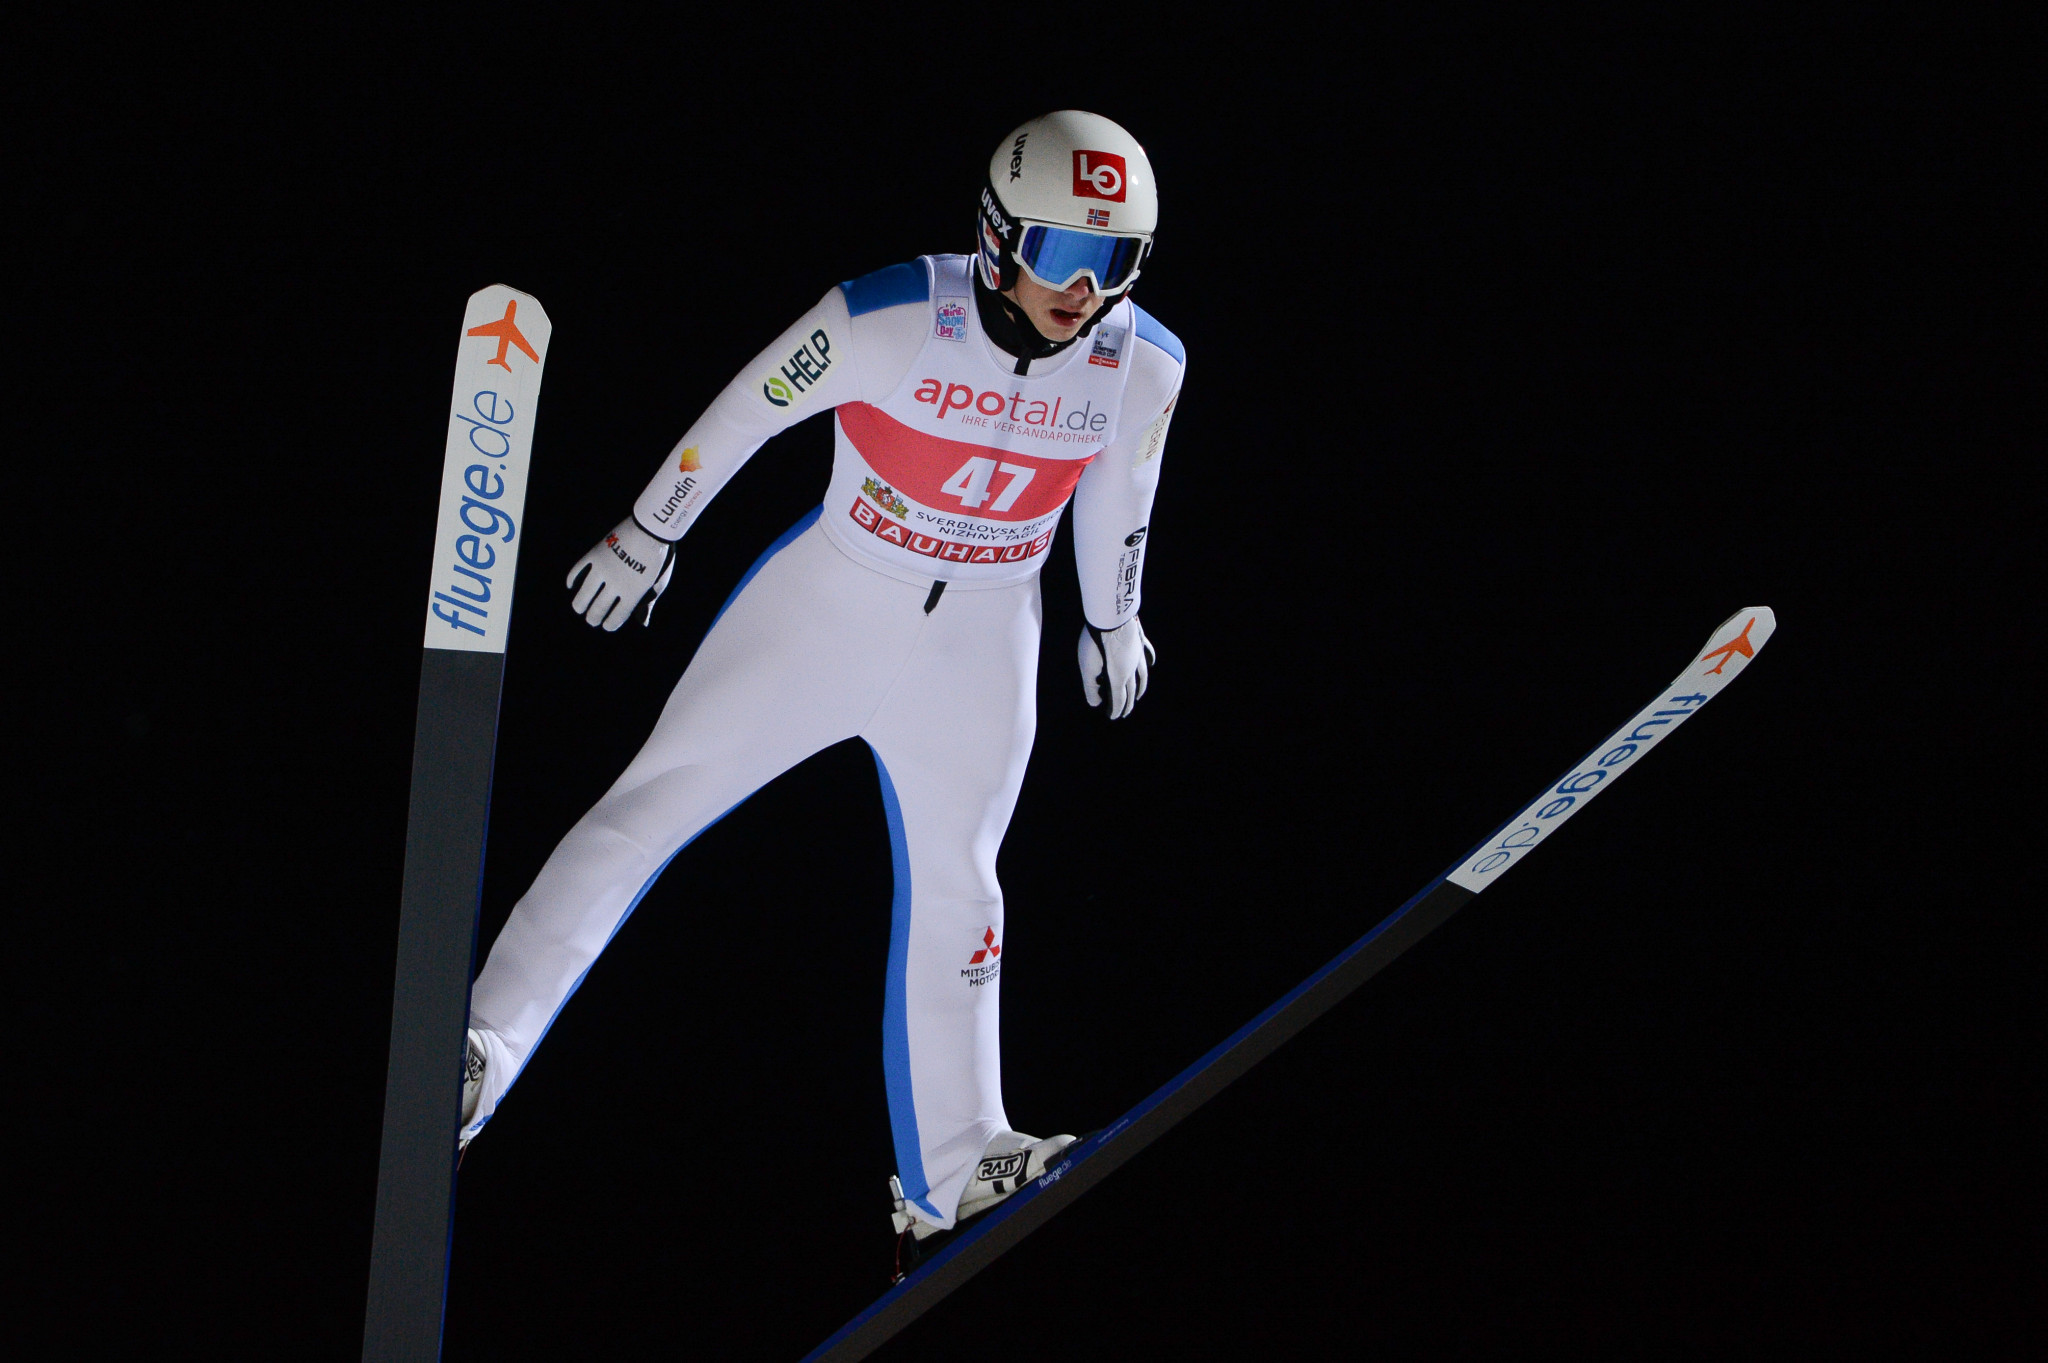 Ski Jumping World Cup and reigning champion Granerud set for liftoff in Nizhny Tagil